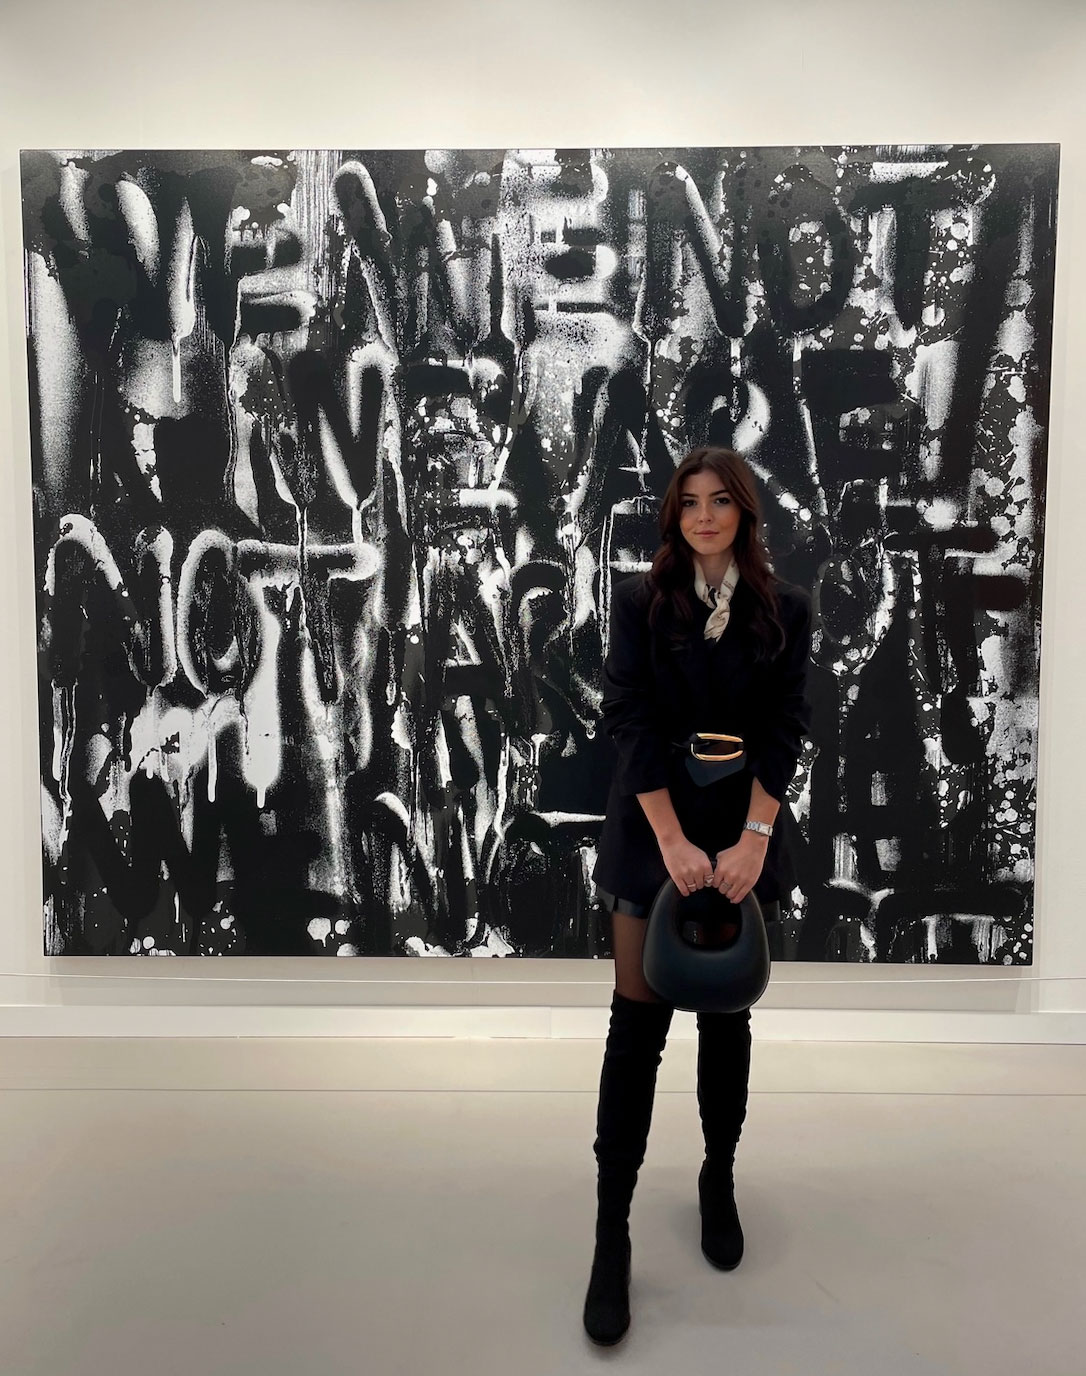 Art history alum Elise Huff (B.A. '20) poses in an art gallery.